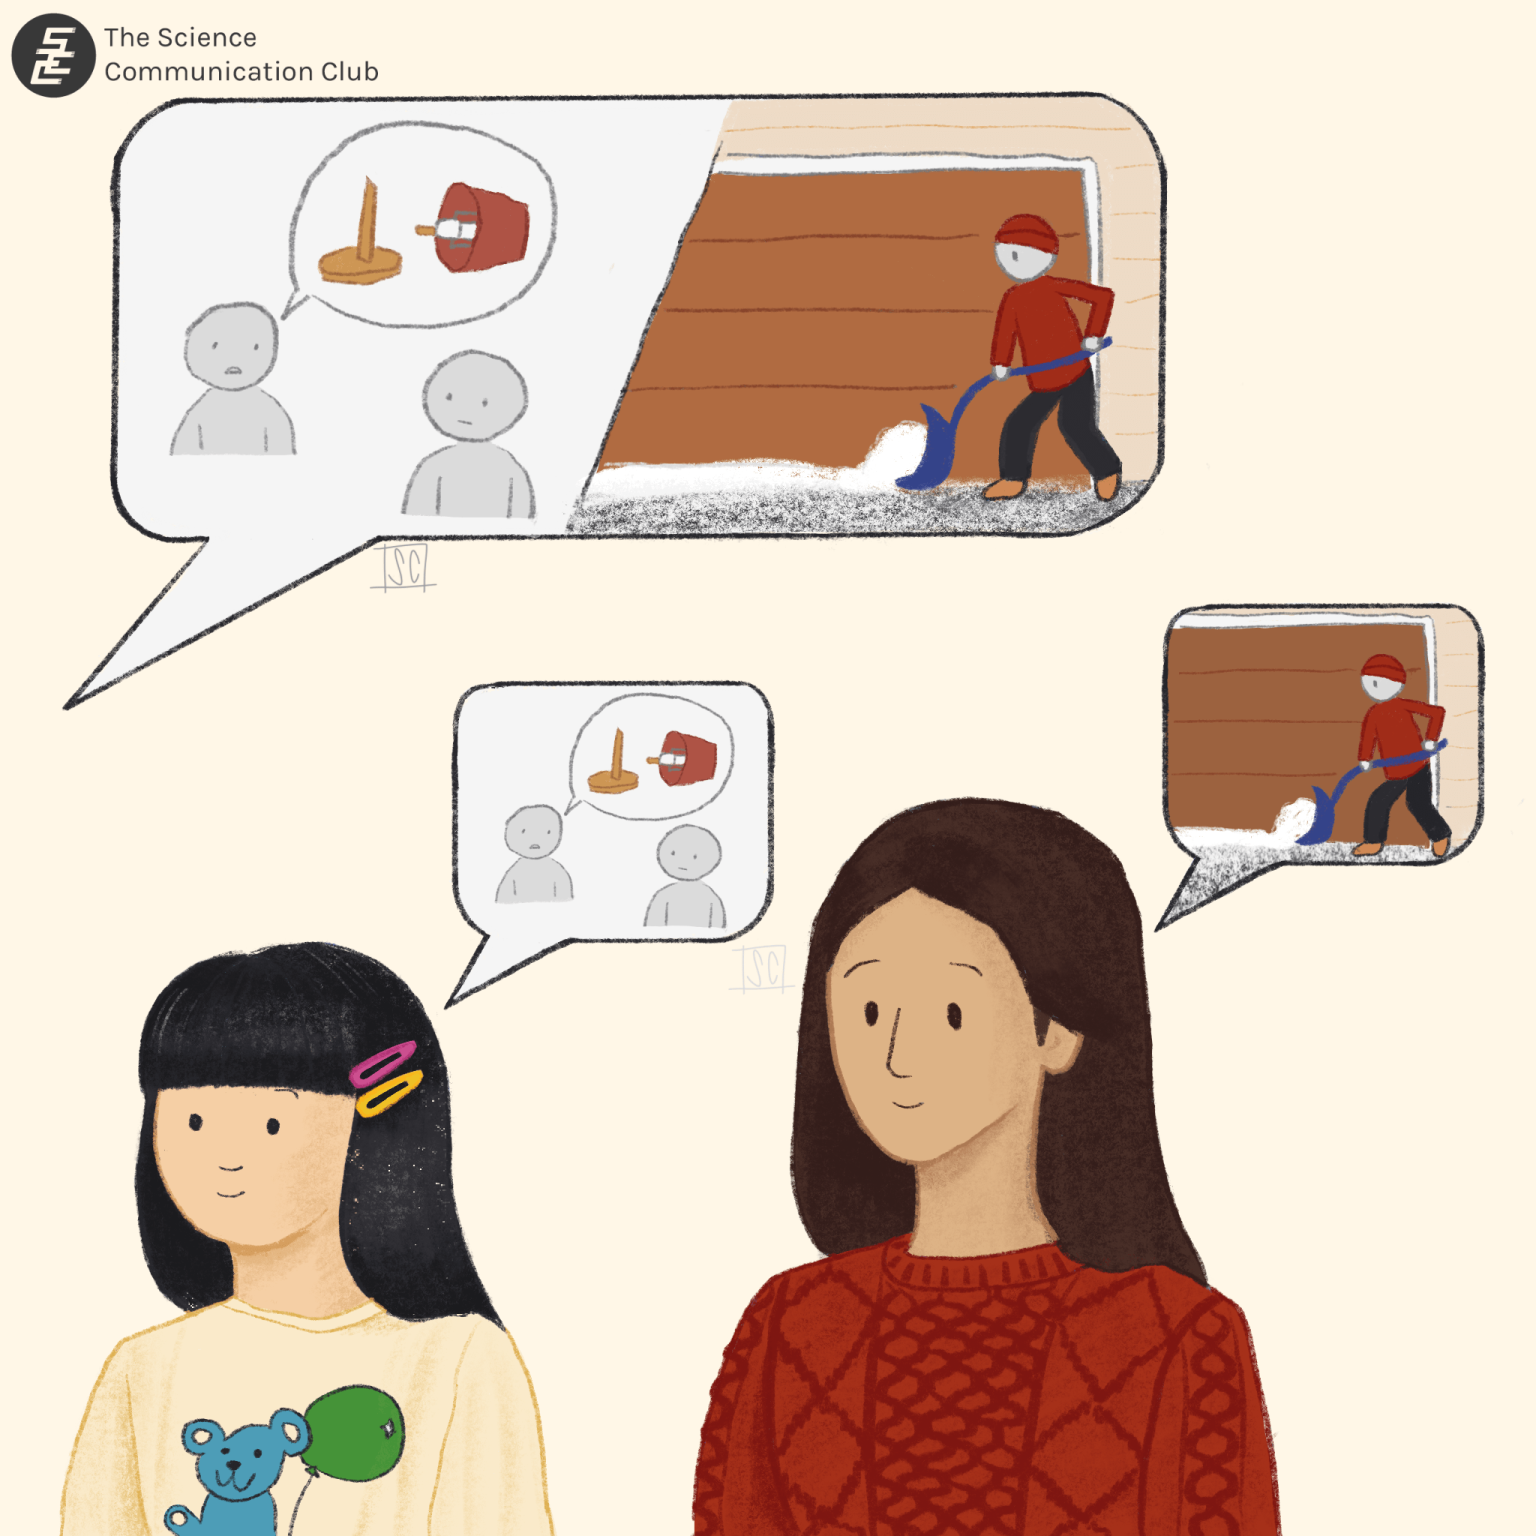 Top left corner has a large speech bubble containing a person telling someone they broke a lamp and someone shoveling snow. Below it is a girl and a woman; the girl has a speech bubble with a person telling someone they broke a lamp and the woman has a speech bubble with someone shoveling snow.